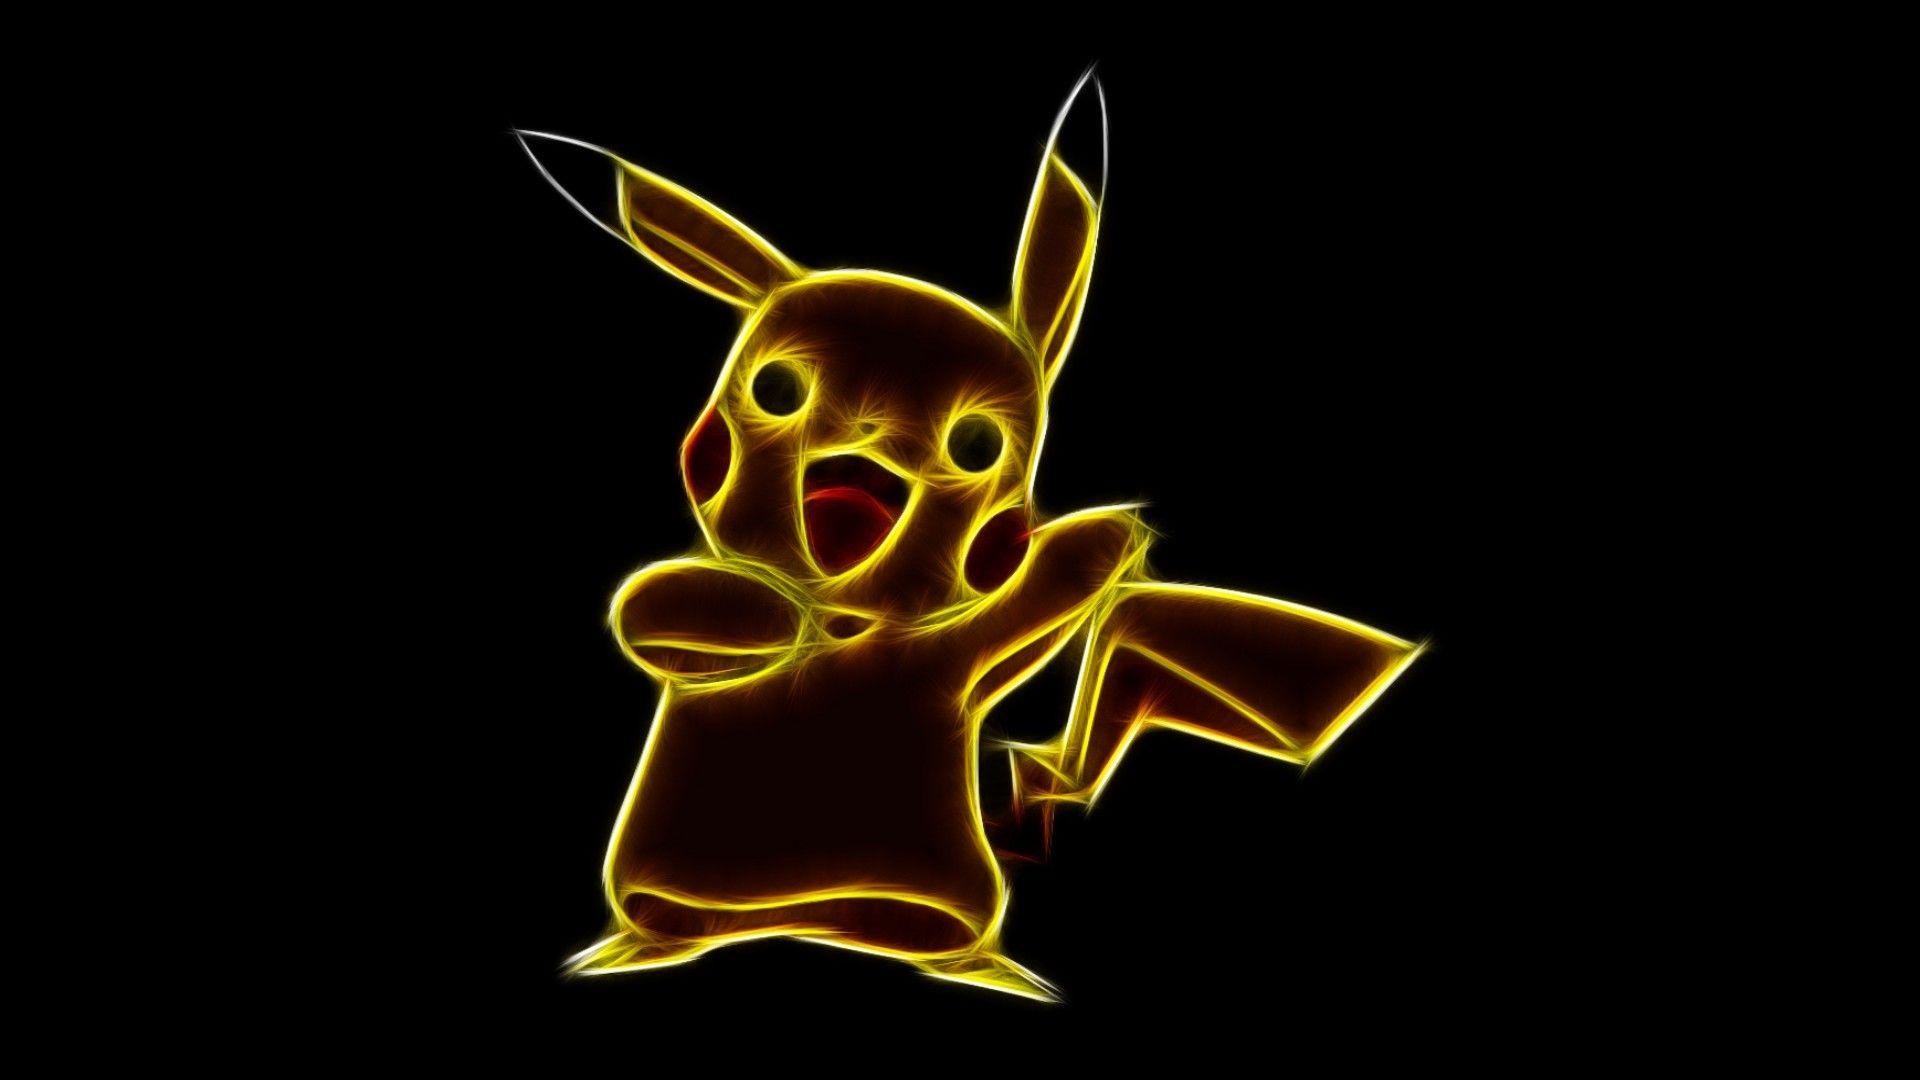 Free chubby Pikachu Pokemon Live Wallpaper APK Download For Android  GetJar